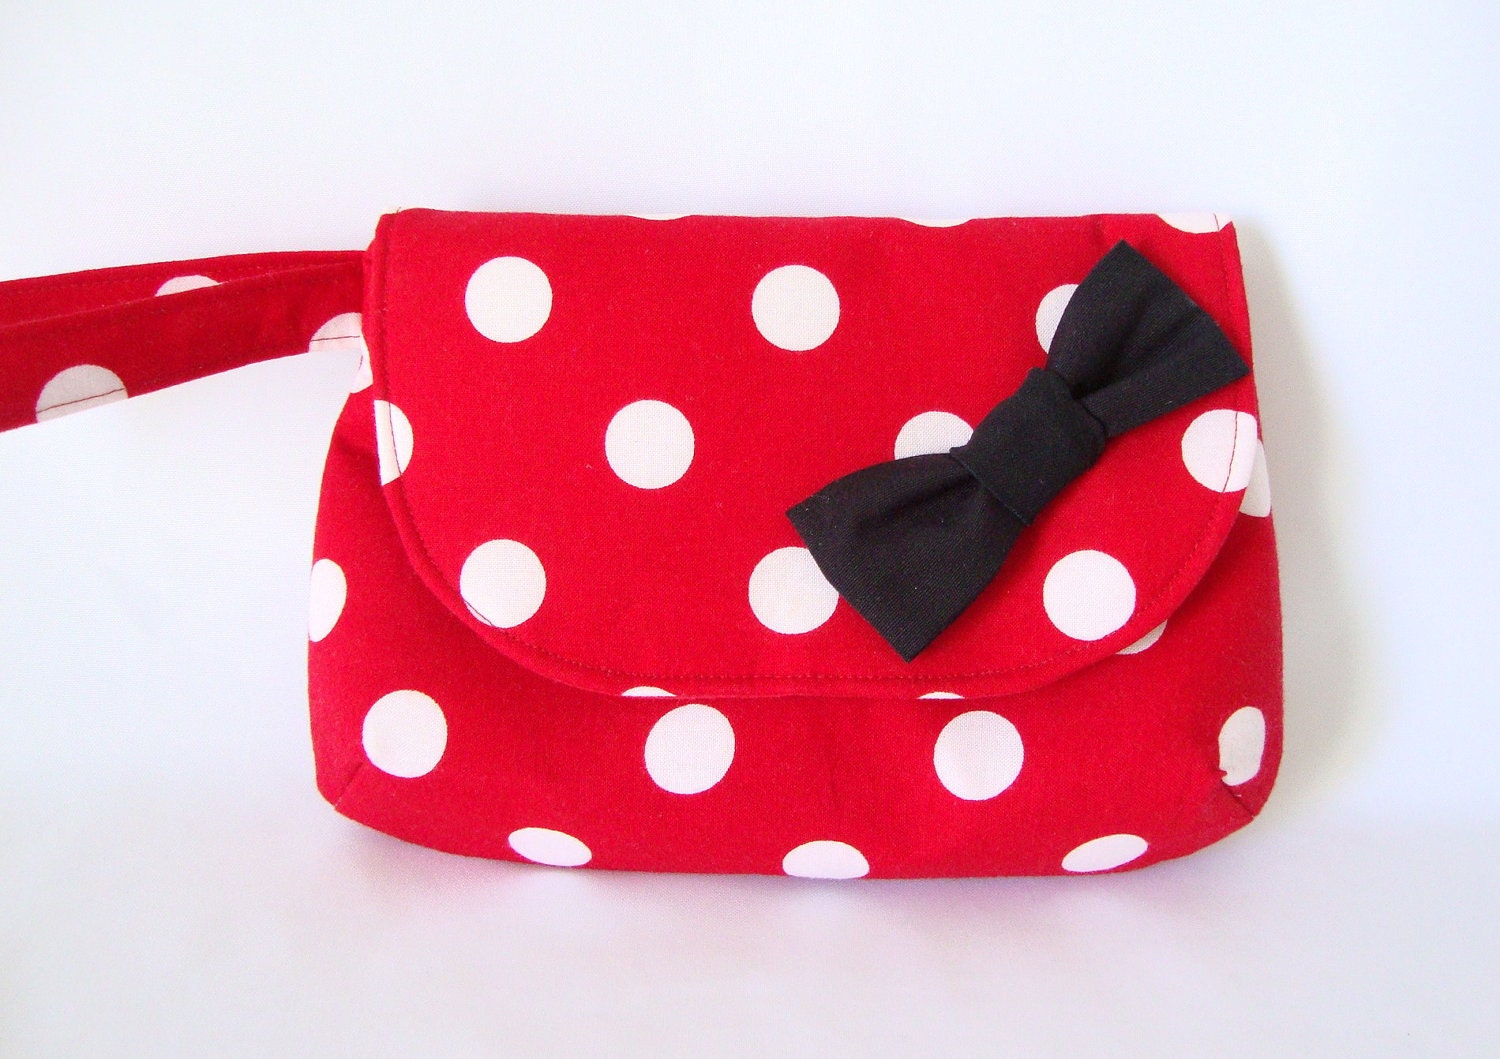 Wristlet Clutch in Red White Polka Dots with Black Bow - PoshPursesBoutique